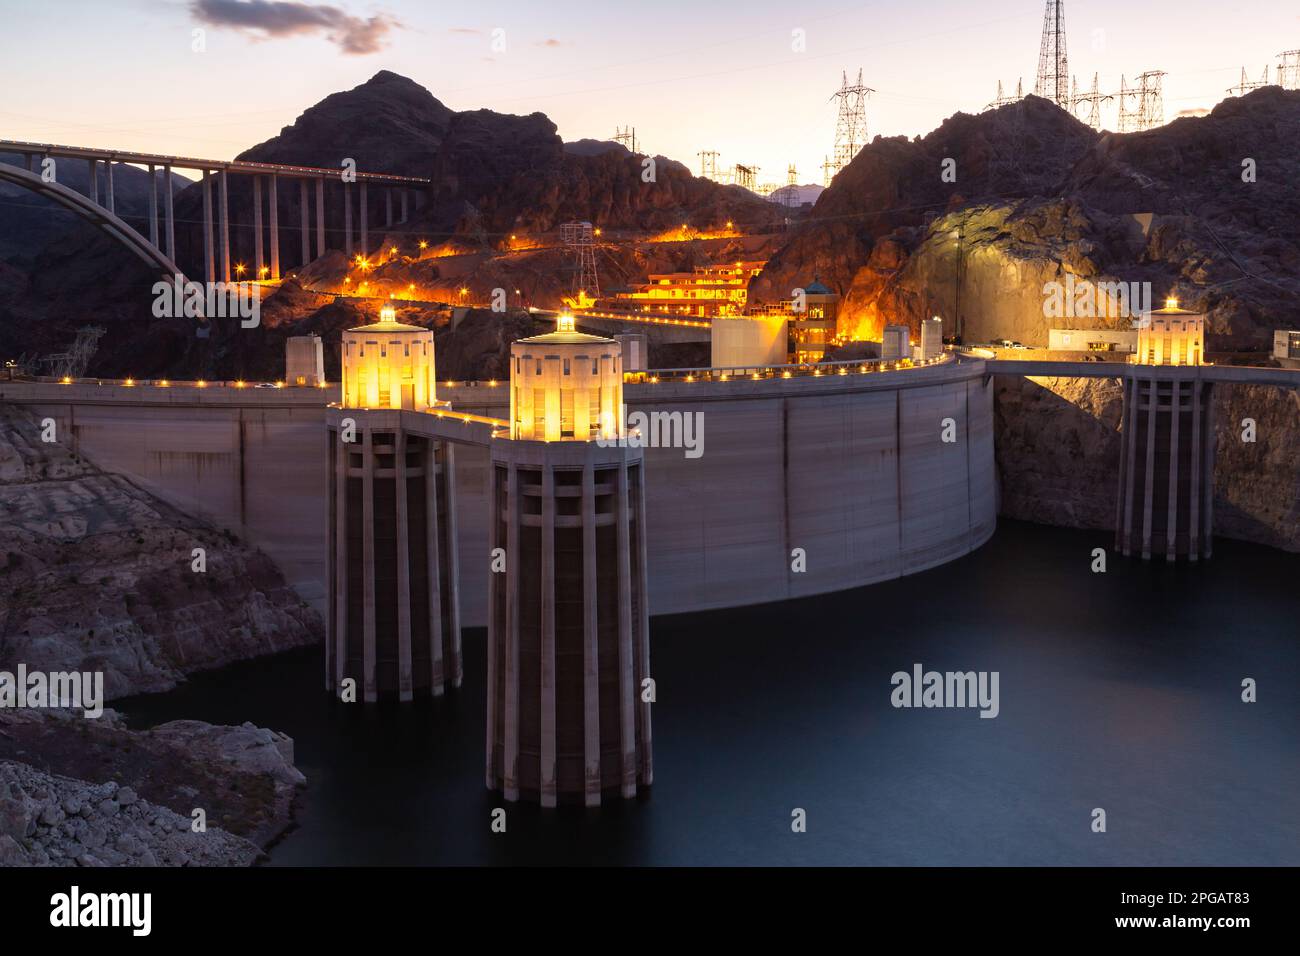 Hoover dam close-up shot. Hoover dam and Lake Mead in Las Vegas area. Large Comstock Intake Towers At Hoover Dam. Hoover Dam in the evening with illuminations without people. Stock Photo